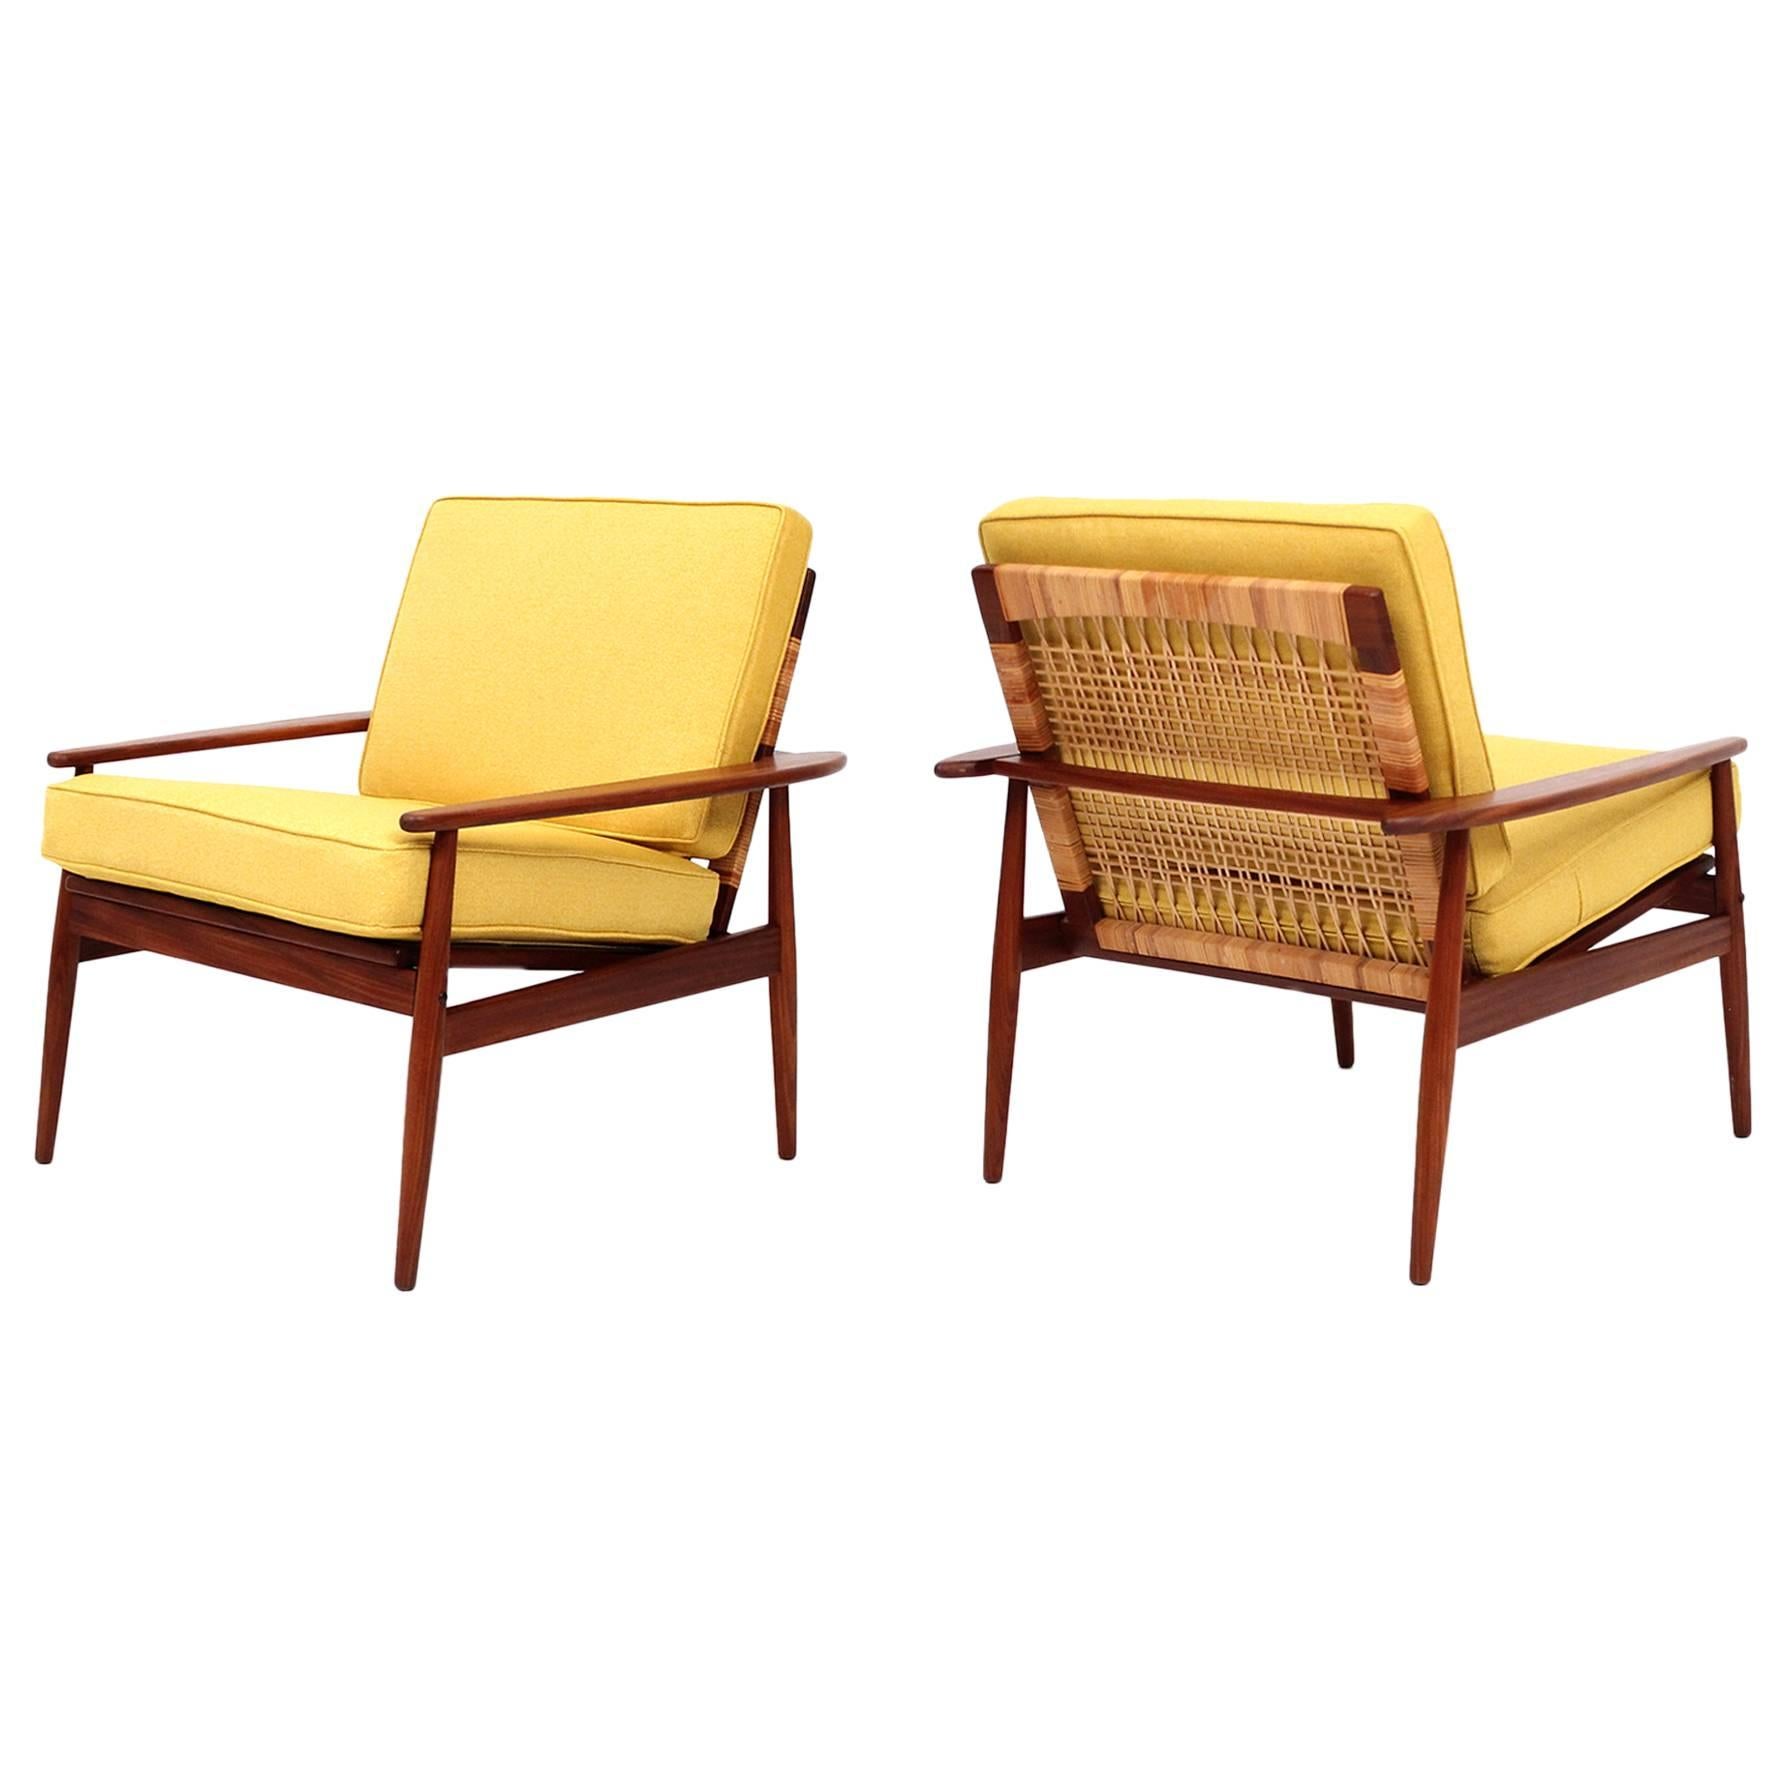 Hans Olsen Teak and Cane Lounge Chairs